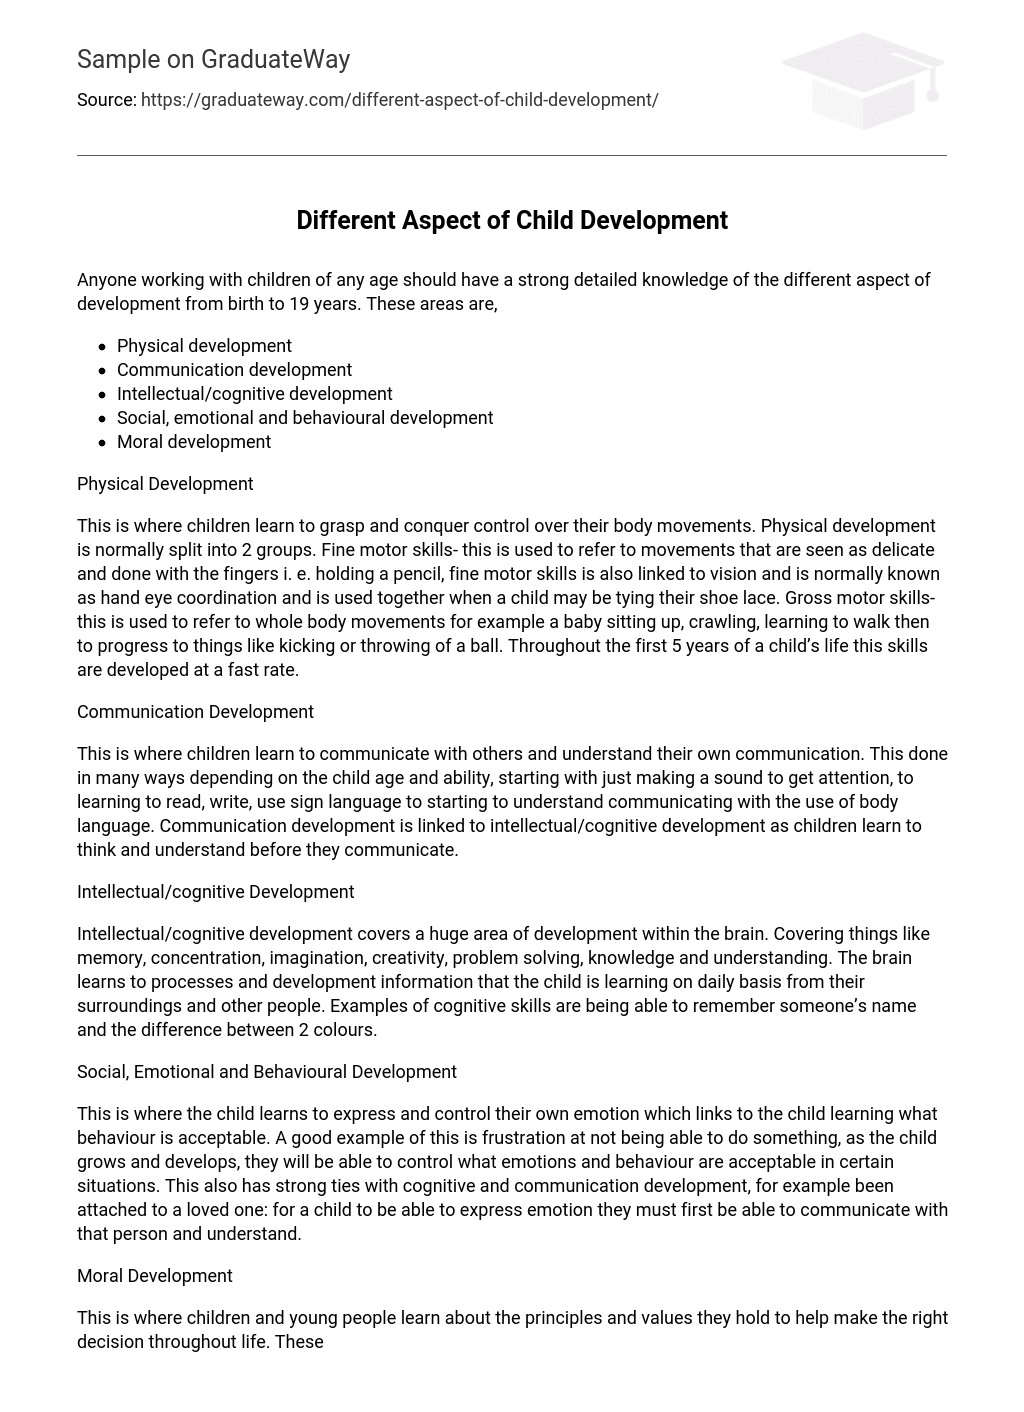 make an essay about how does the aspect of development